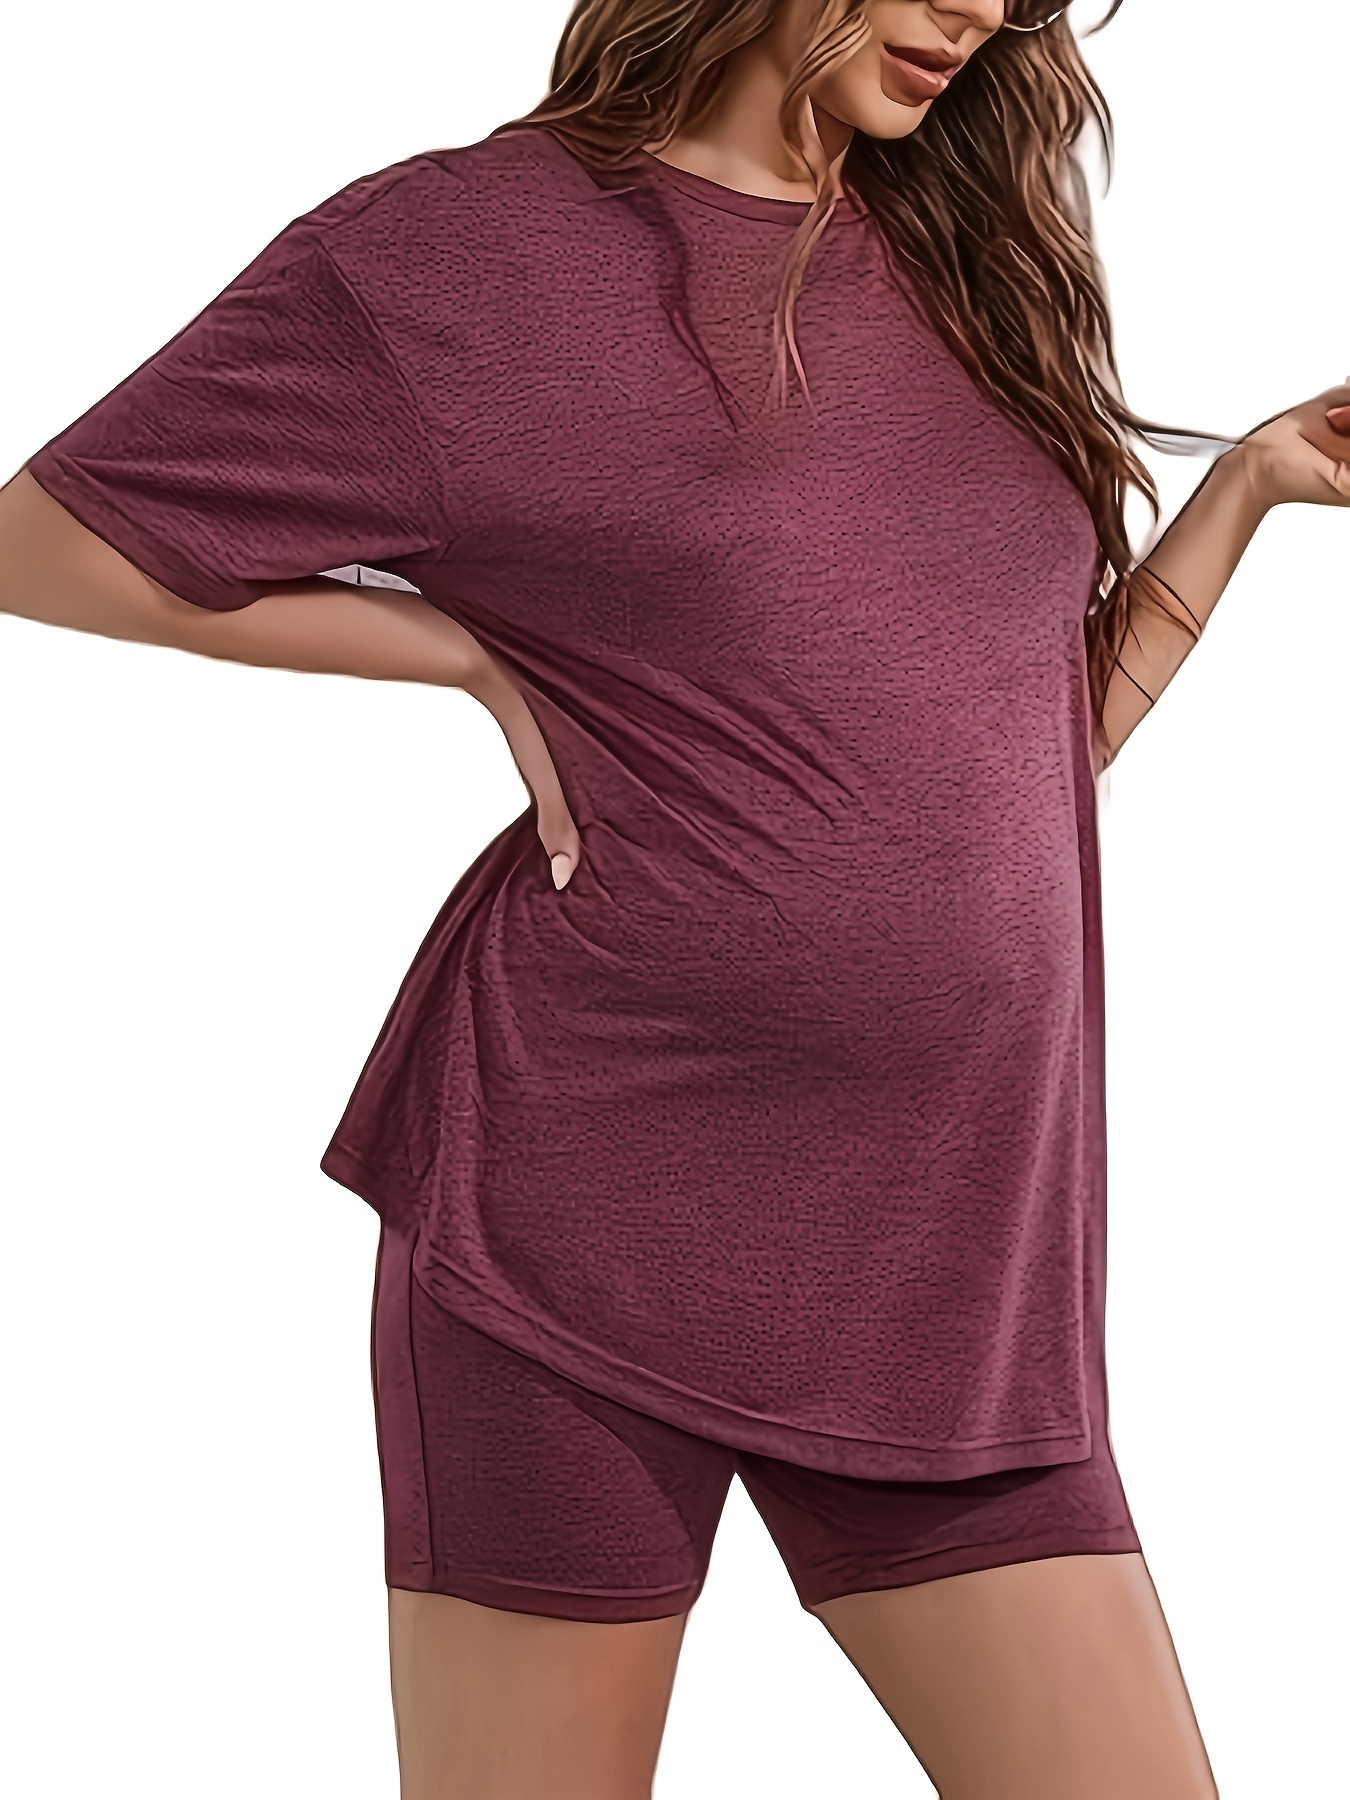 Maternity Pregnant Women's Pajama Sets, Comfy Loose V Neck Long Sleeves  Button Up Top & Slightly Stretch Pants For Pregnancy Care